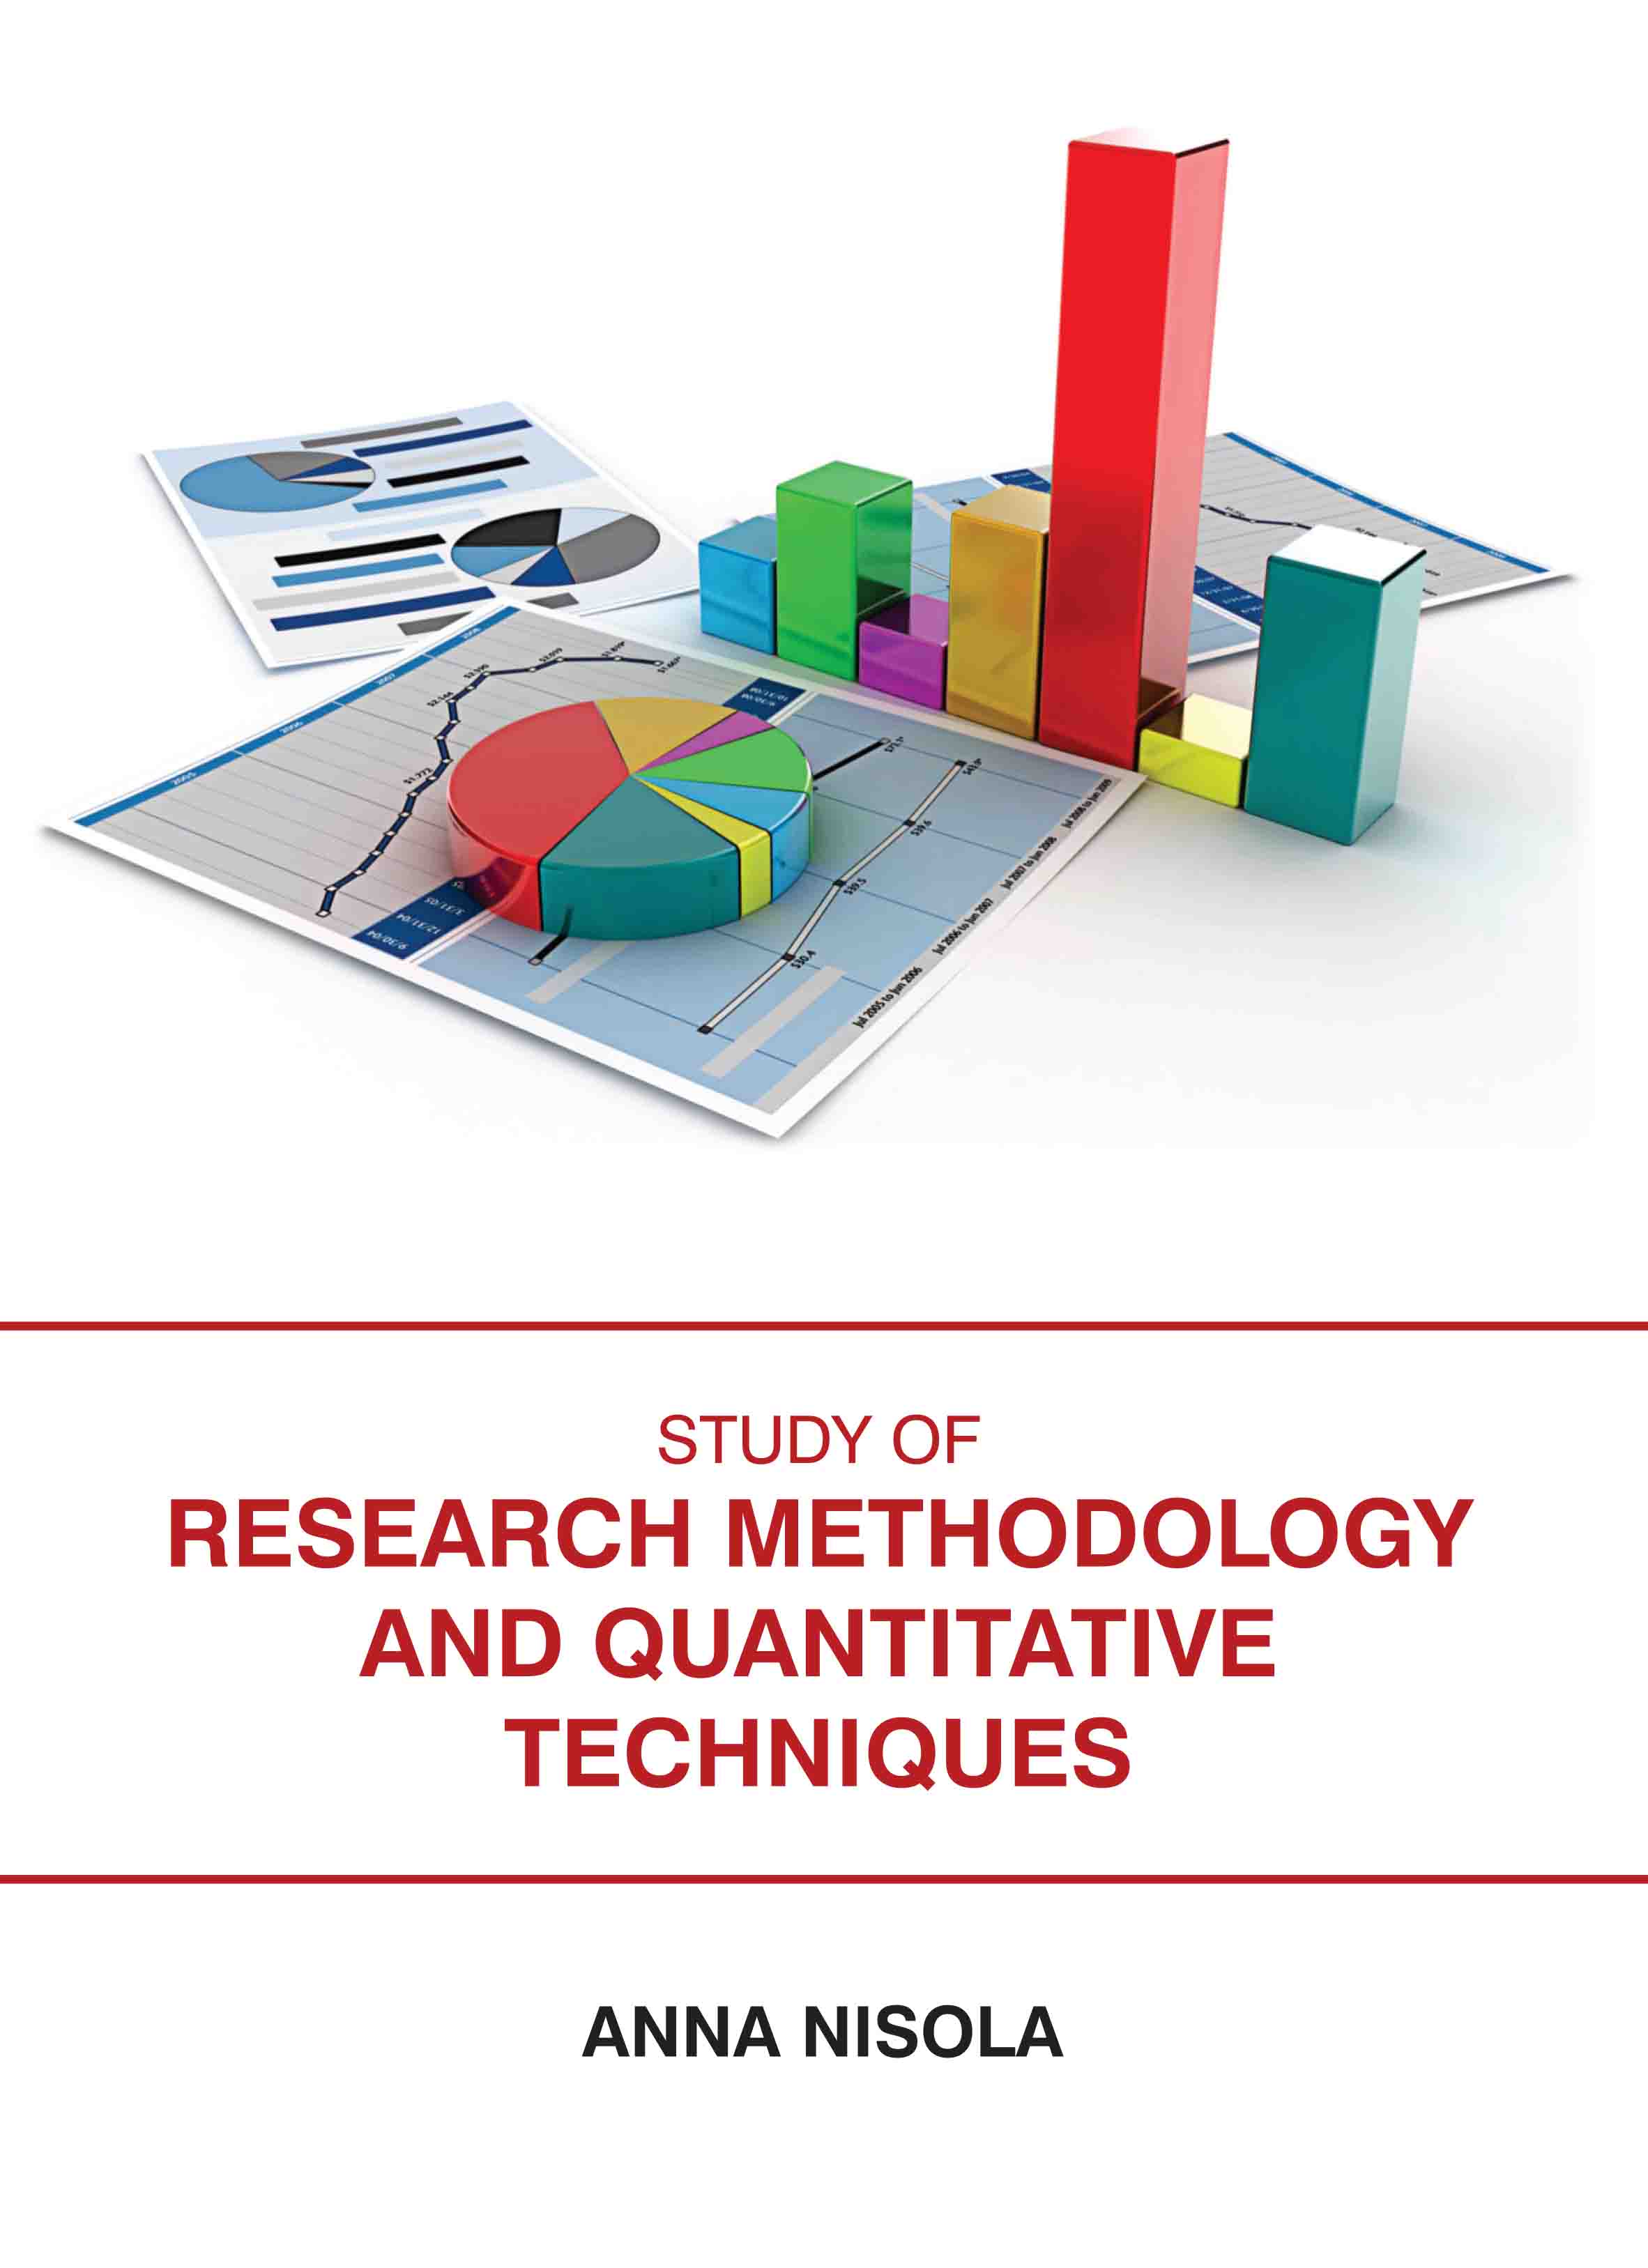 Study of Research Methodology and Quantitative Techniques